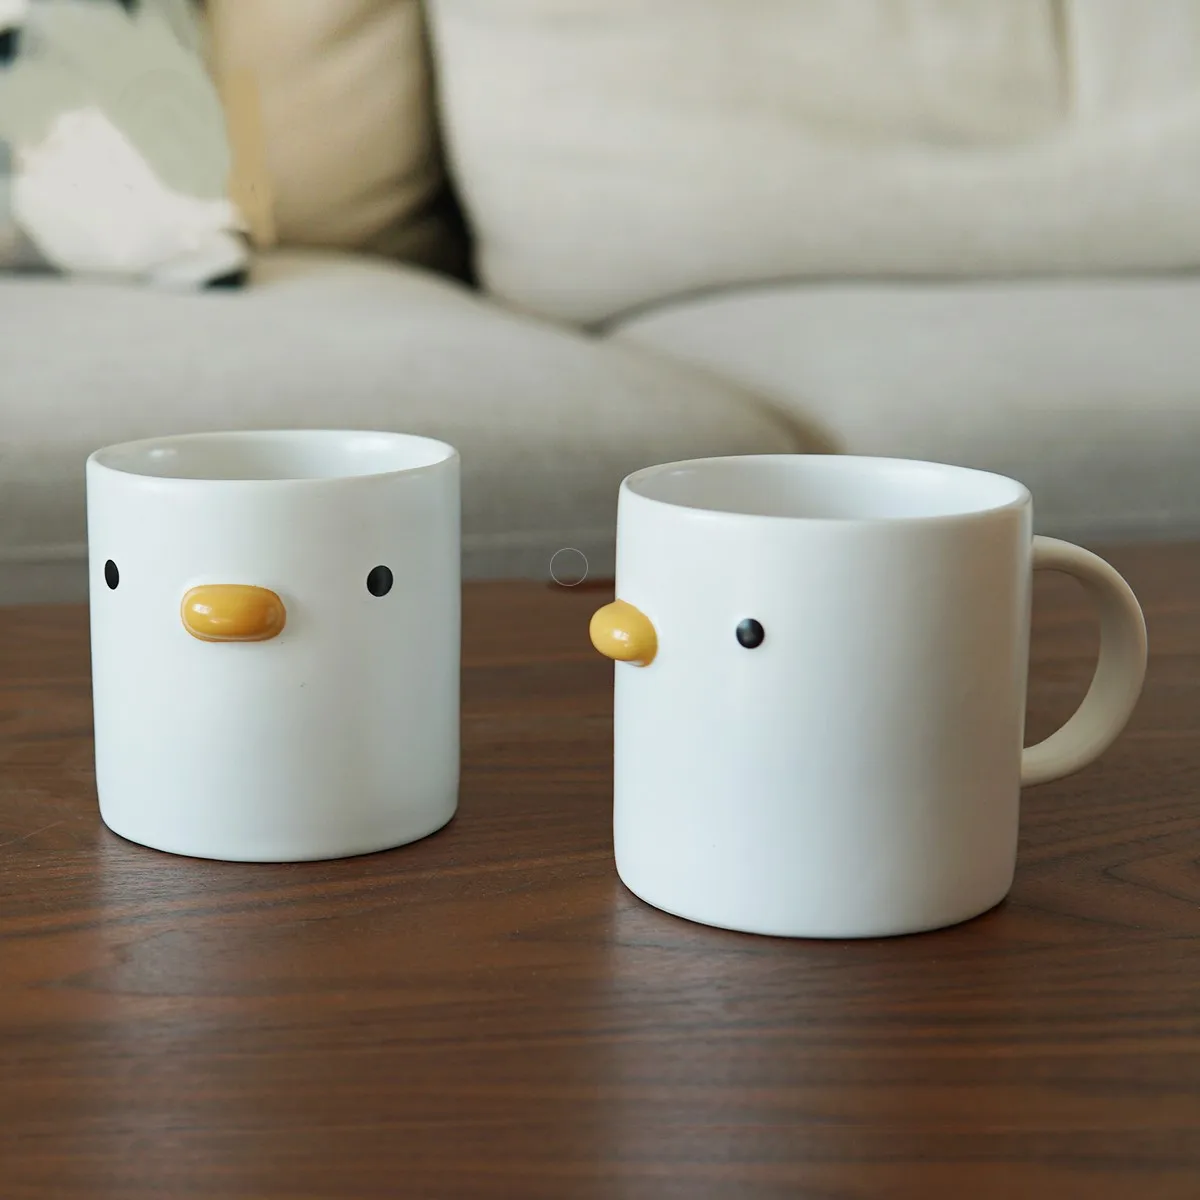 

400ml Ceramic Mugs Chick Mugs Coffee Cups Microwave Safe Milk Mug Juice Handgrip Office Water Cup Kitchen Party Drinking Tools